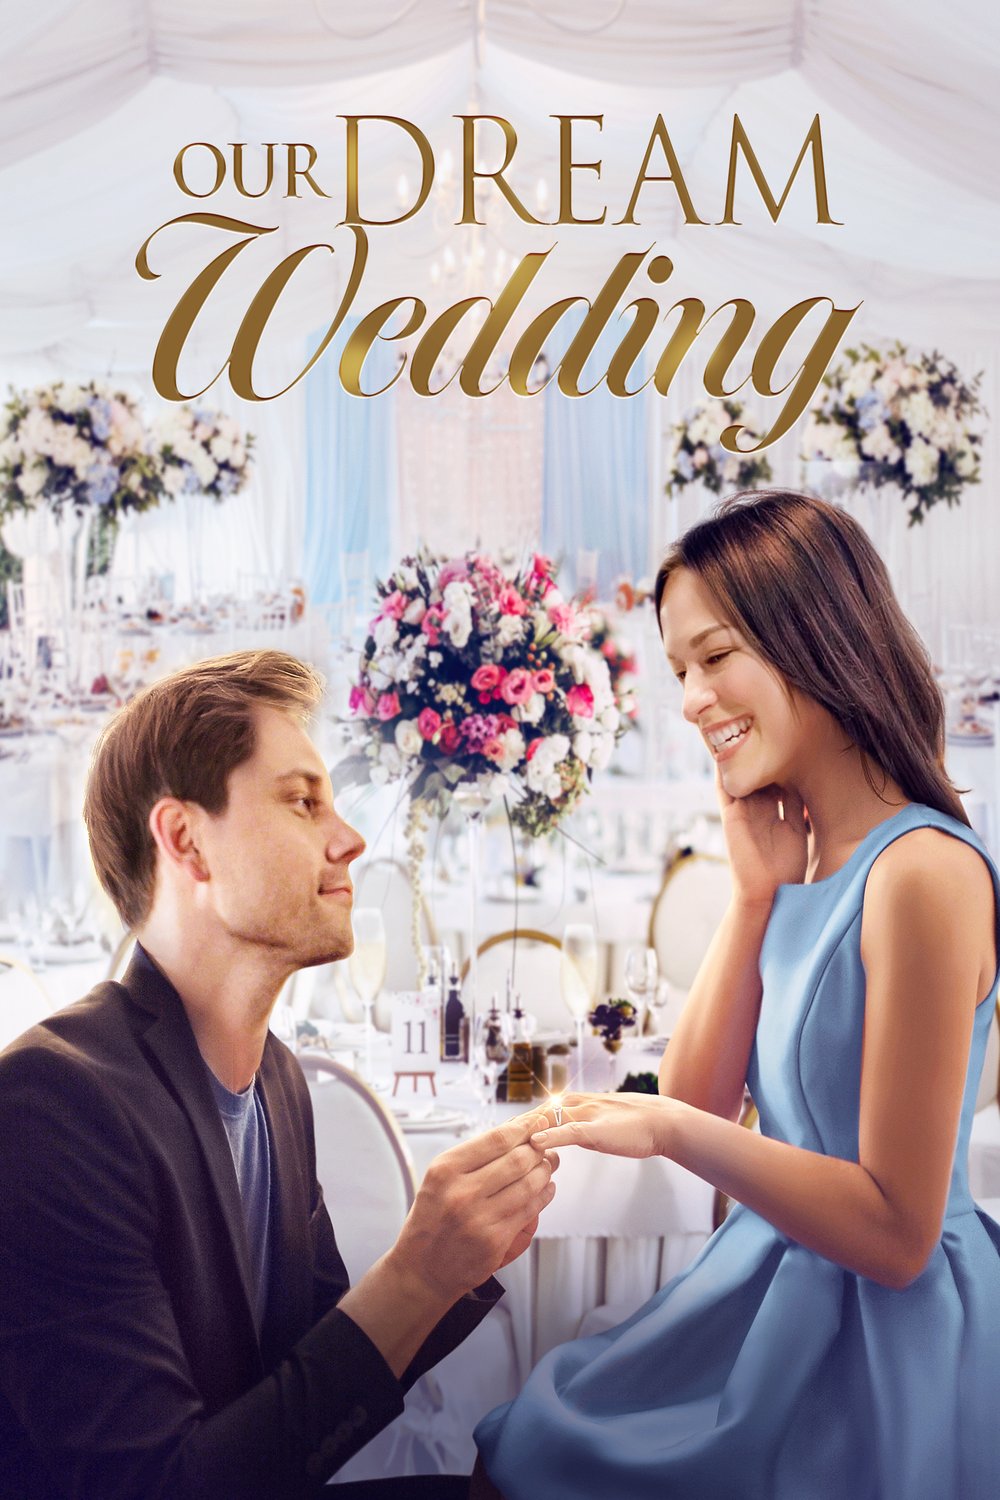 Poster of the movie Our Dream Wedding